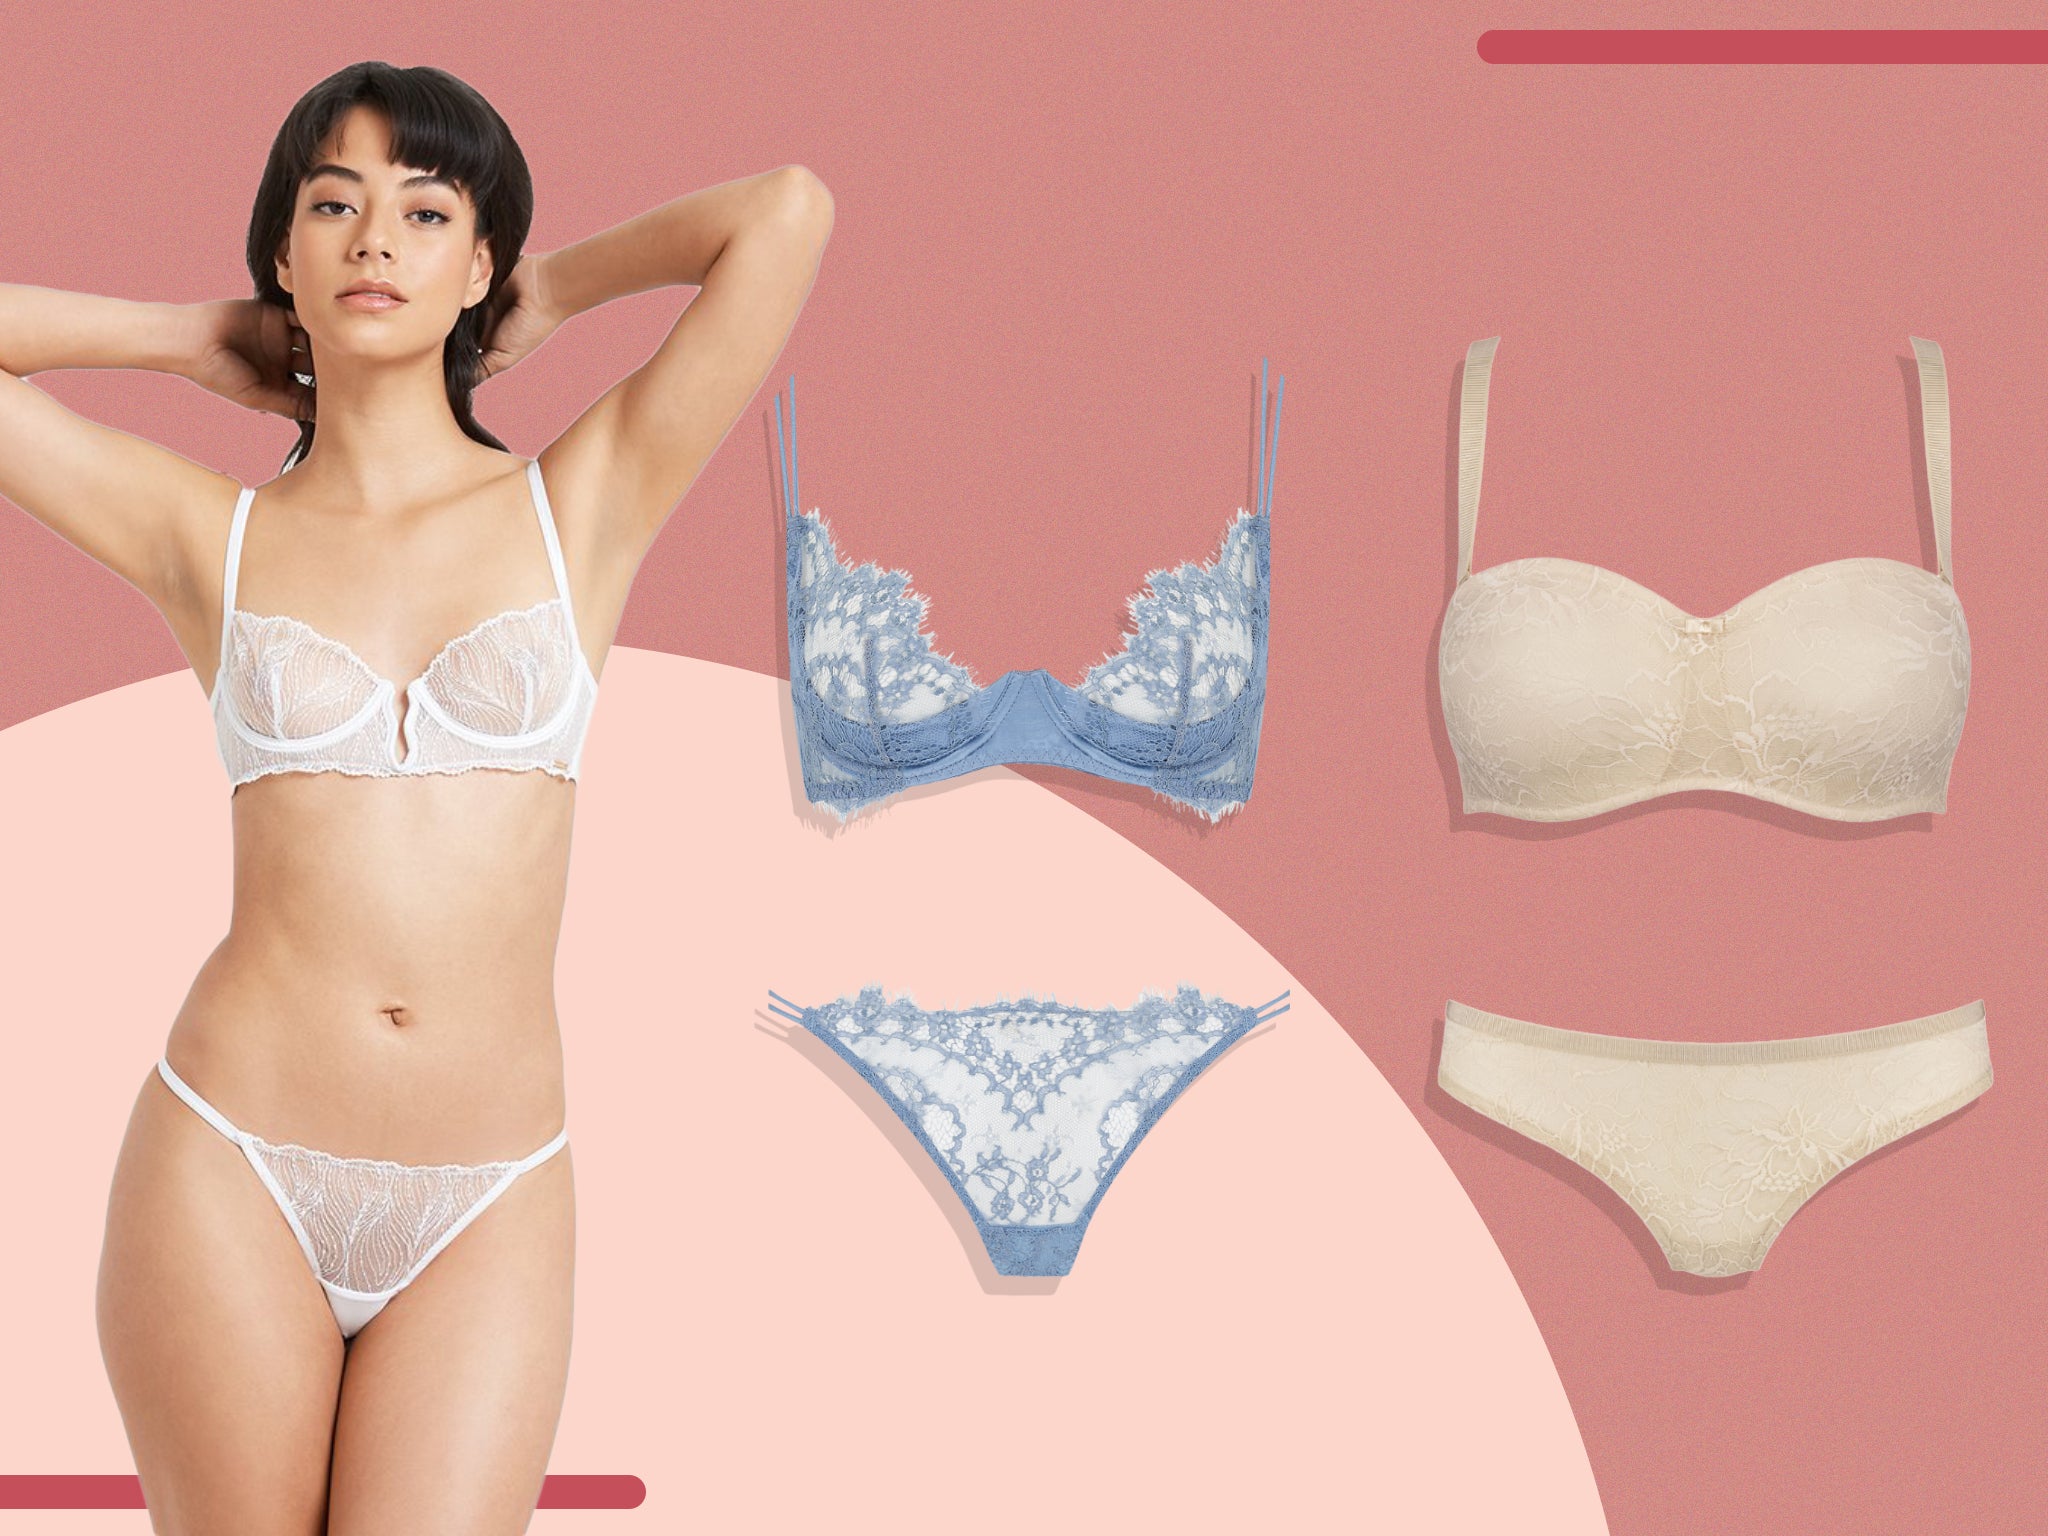 Find delicate lace accents, pretty pastels and traditional ivory satin in our round-up